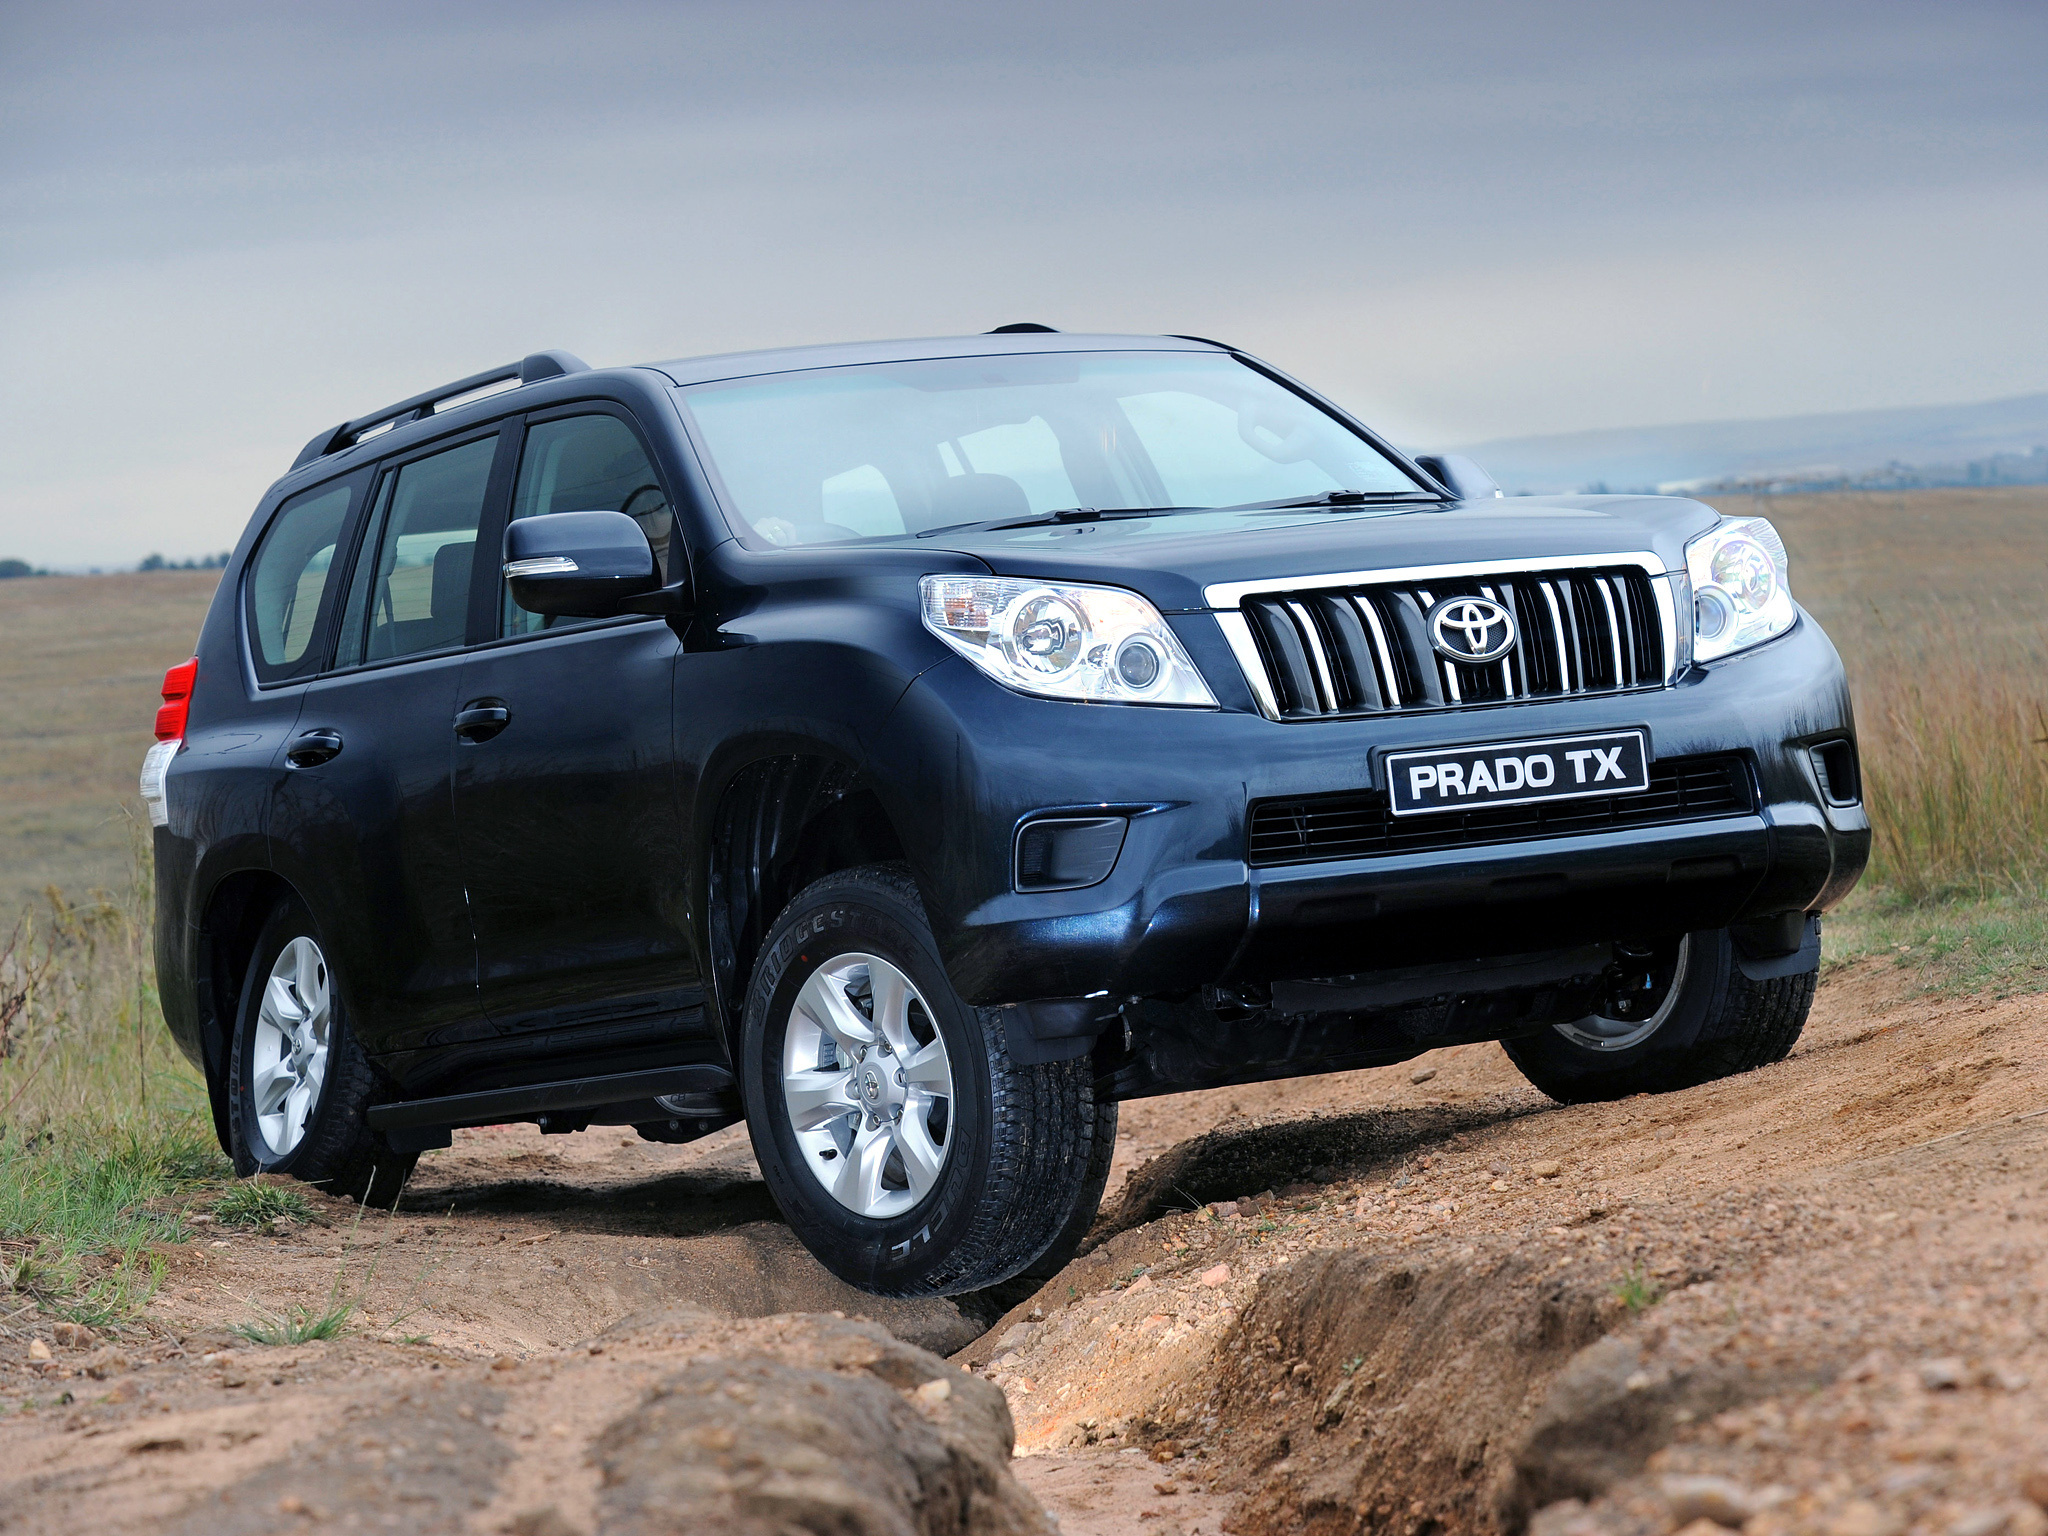 toyota, cruiser, cars, tlc prado collection of HD images